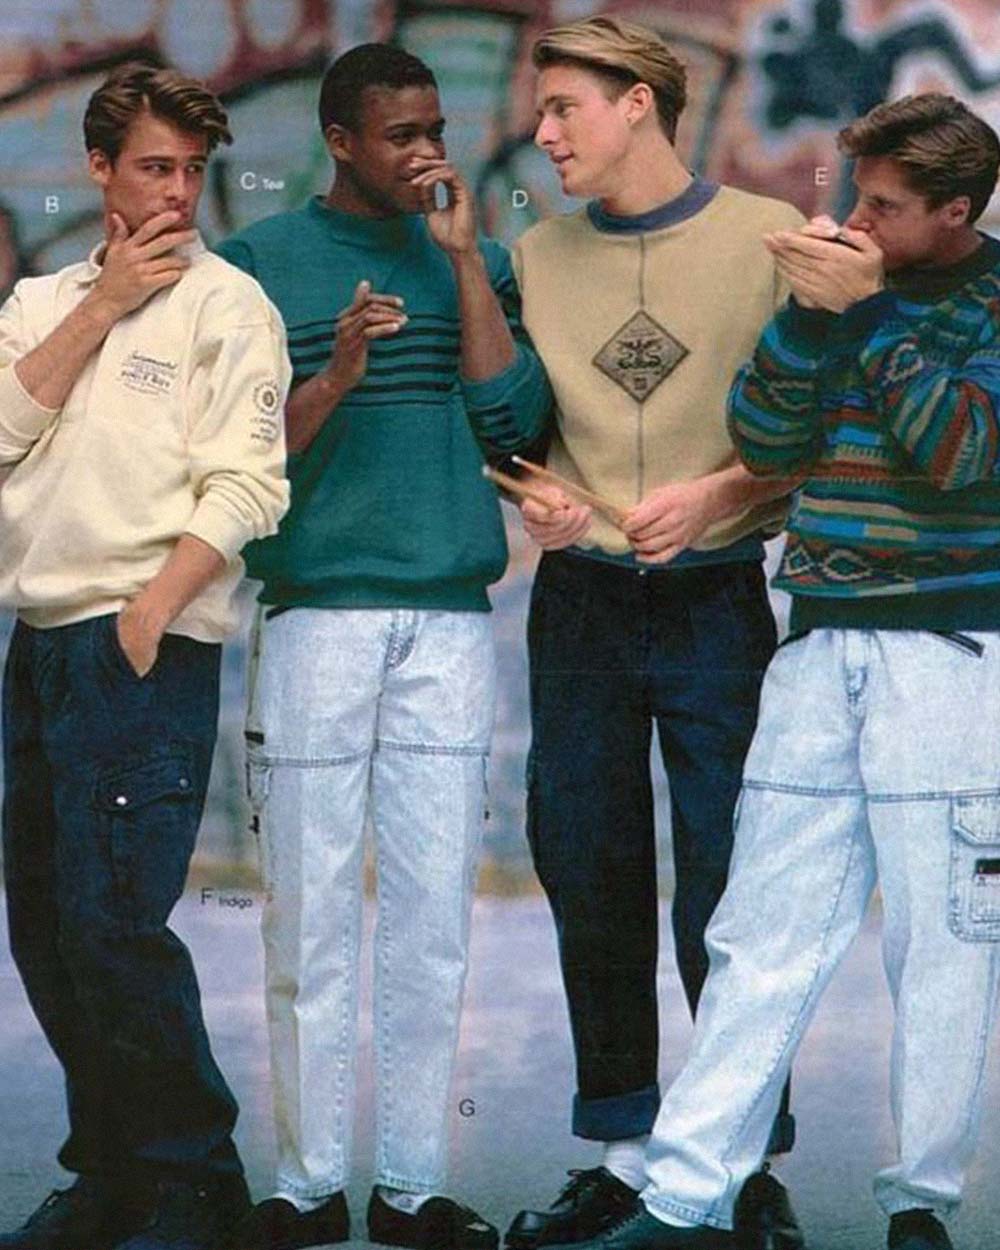 men in 1990s wearing casual, colorful clothing